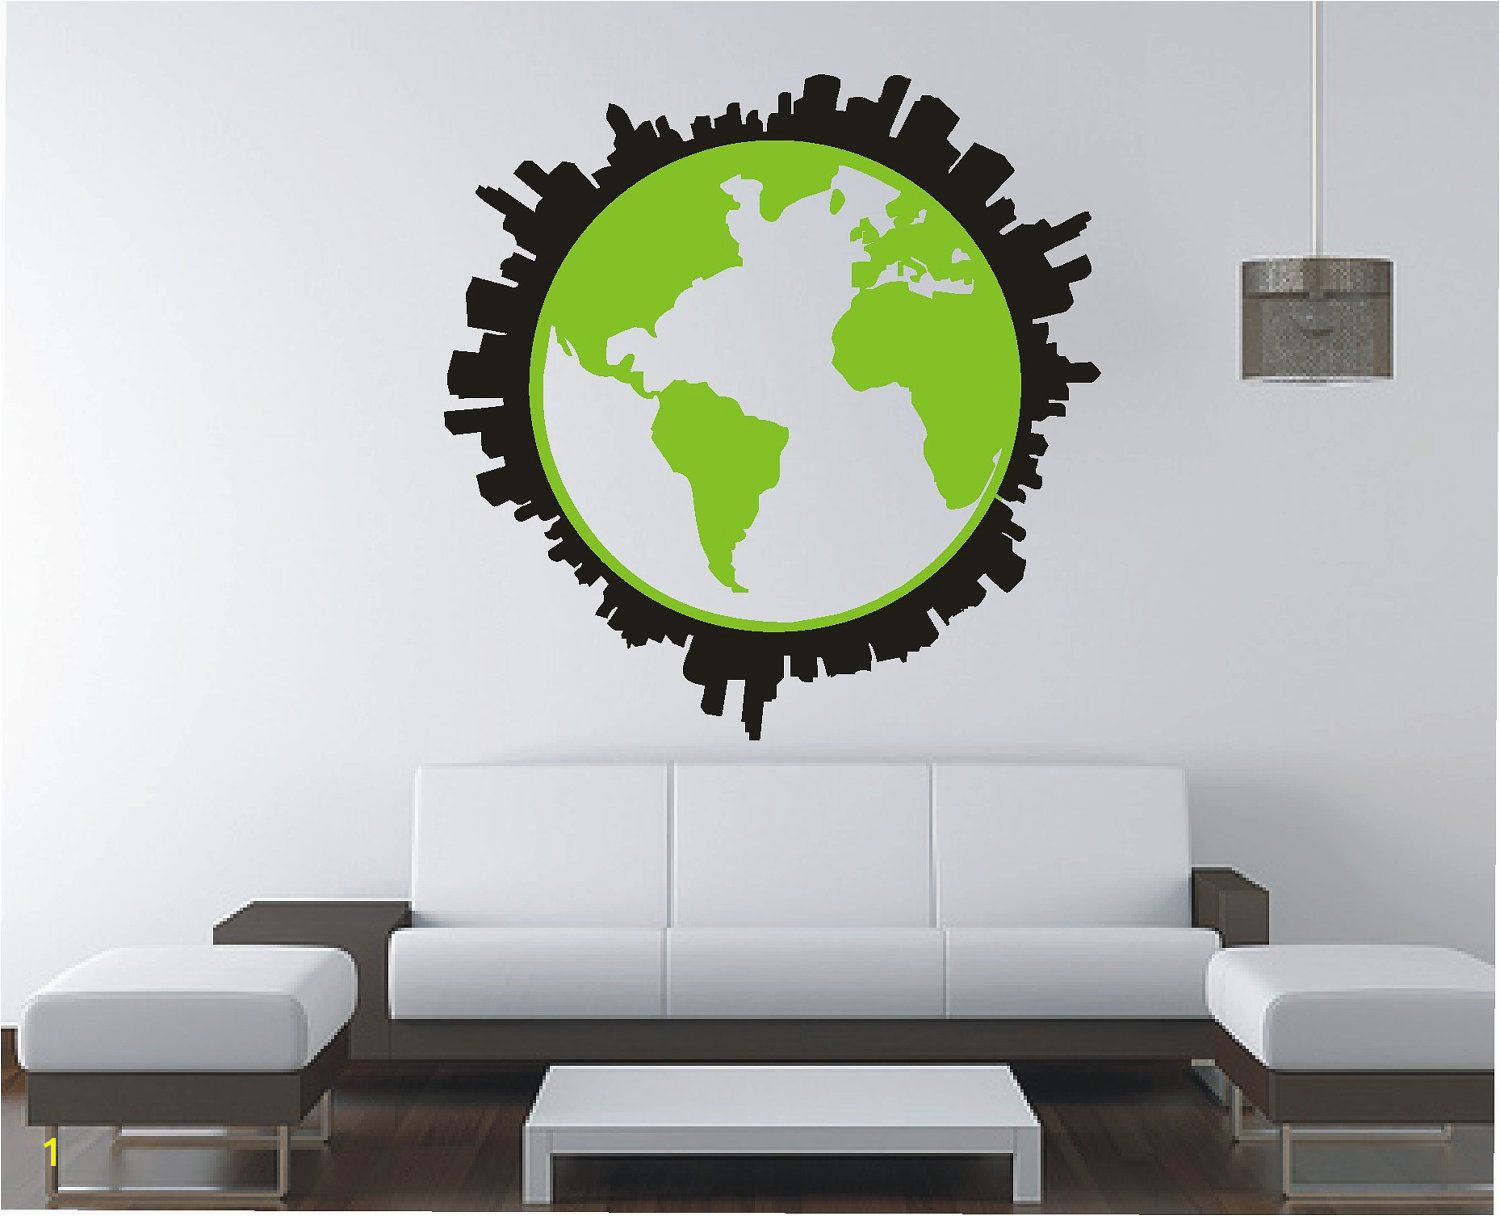 City Map Wall Mural Sticker Skylines Of the World